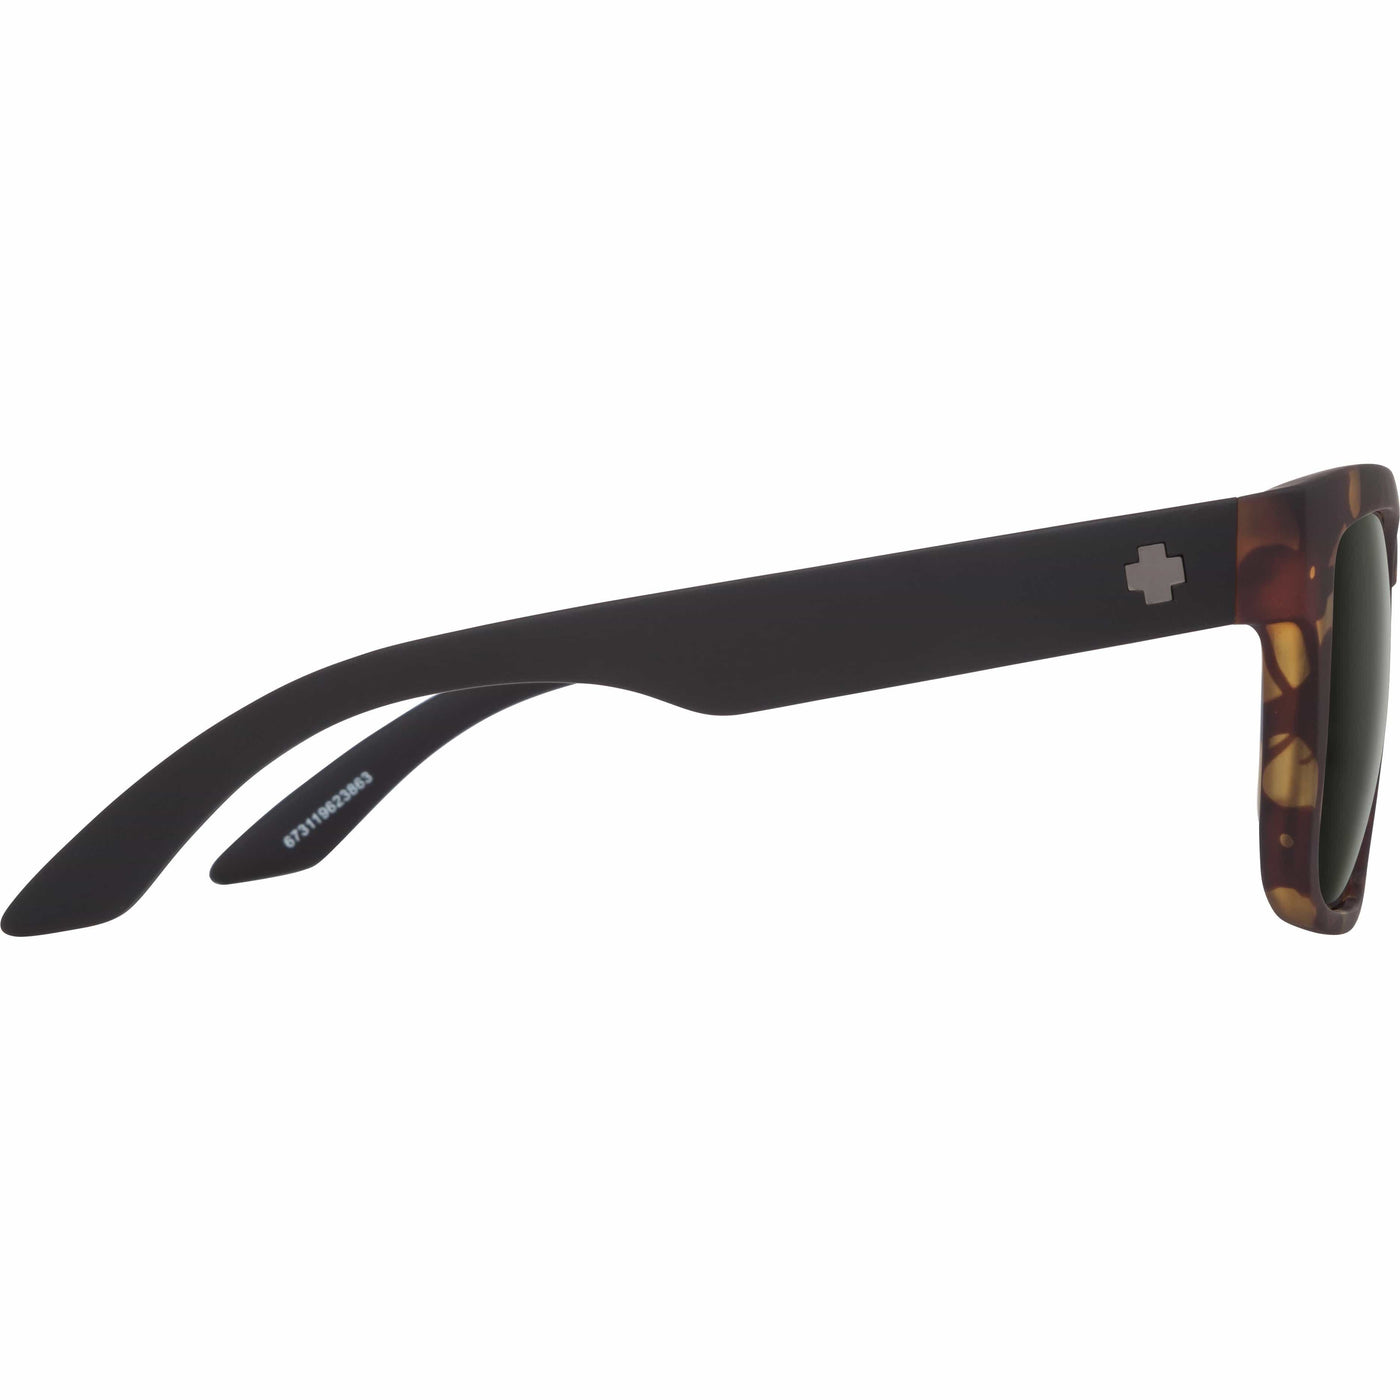 SPY Optic DISCORD Sunglasses, Happy Lens - Vintage 8Lines Shop - Fast Shipping